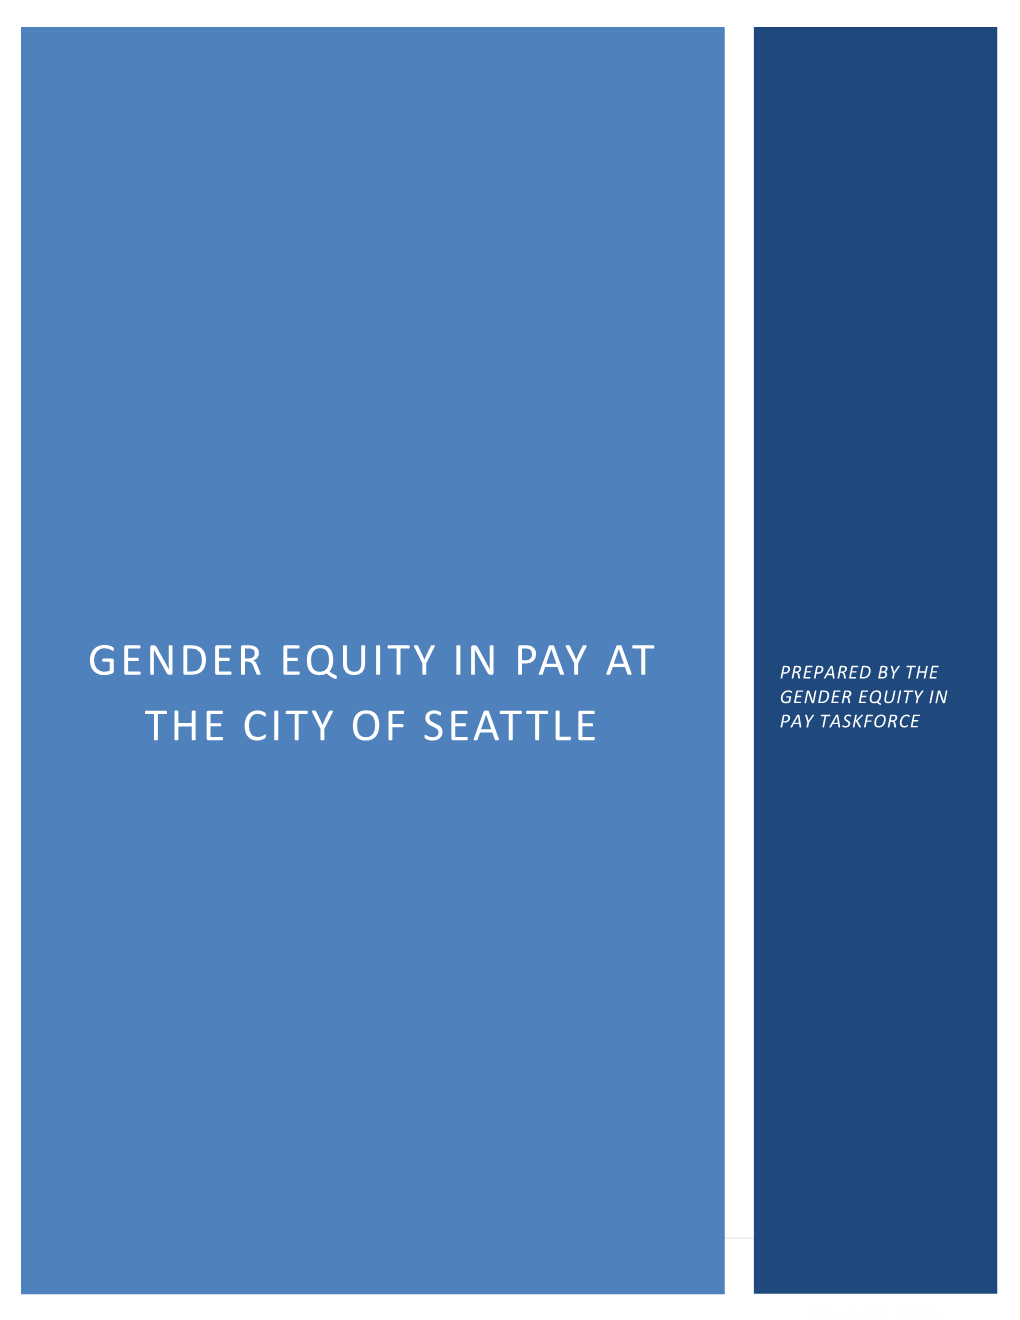 Gender Equity in Pay at the City of Seattle